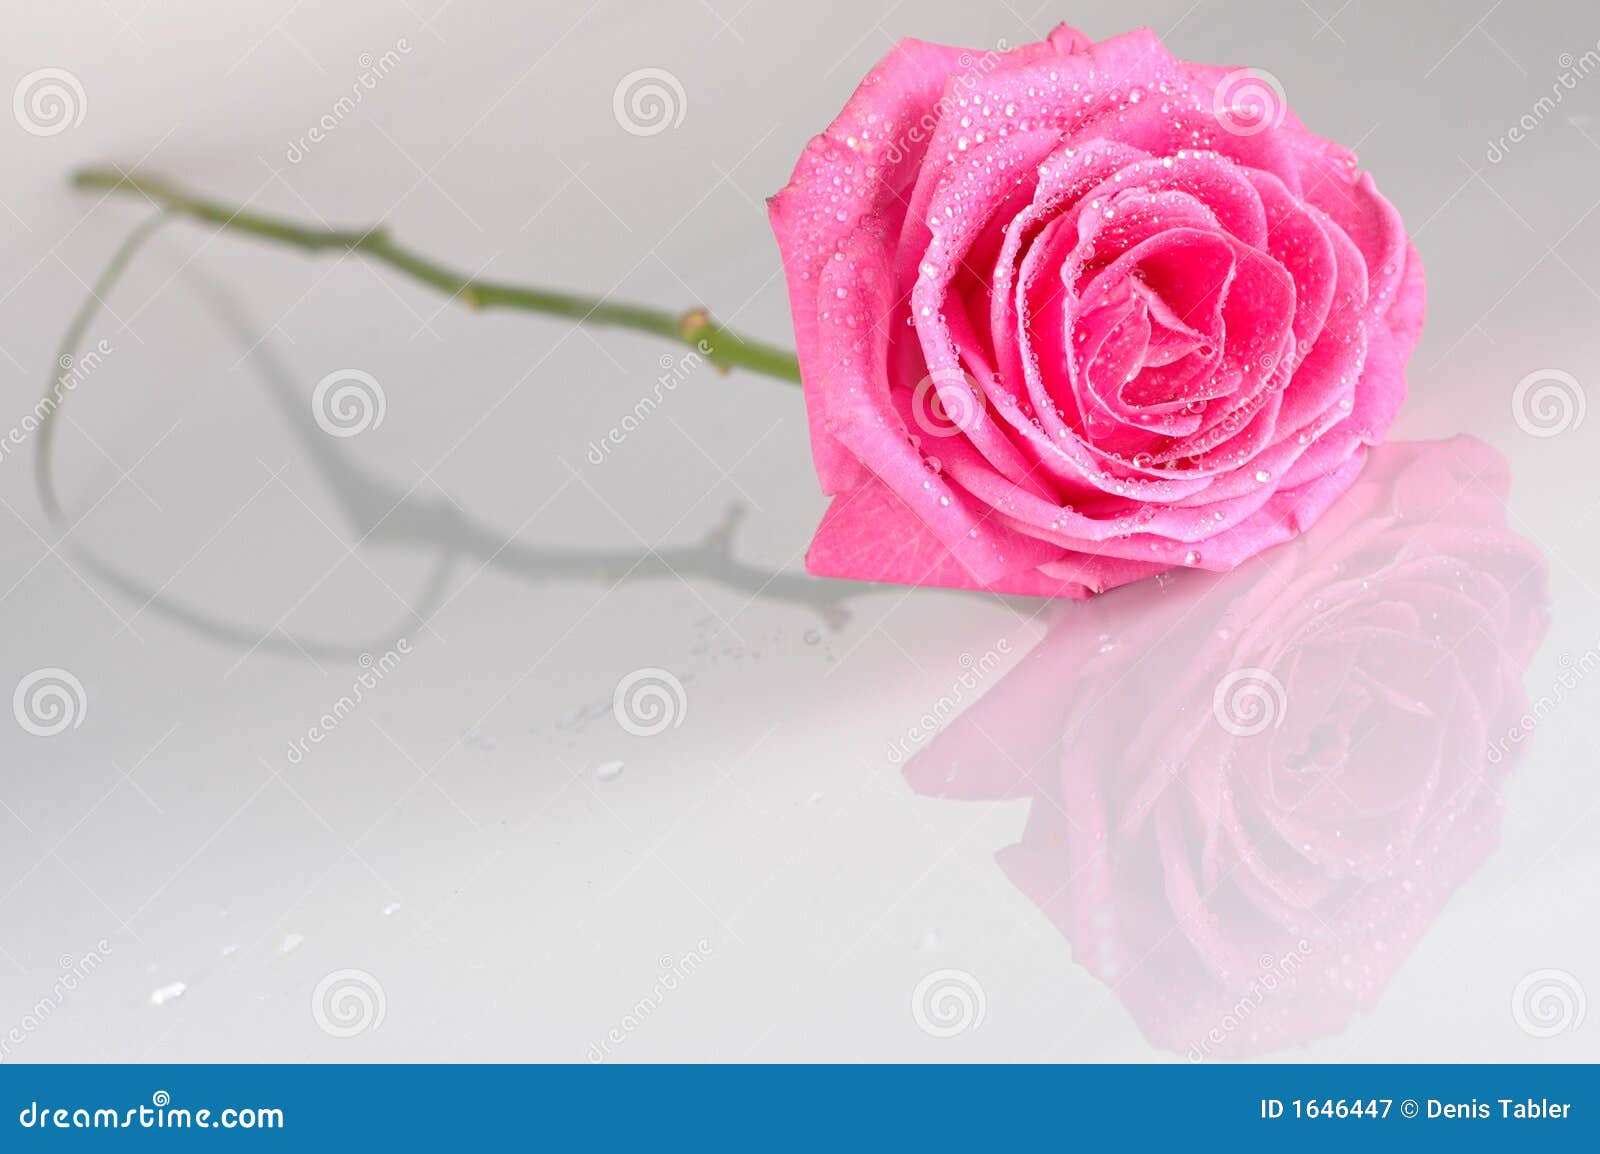 Pink Rose With Water Drops